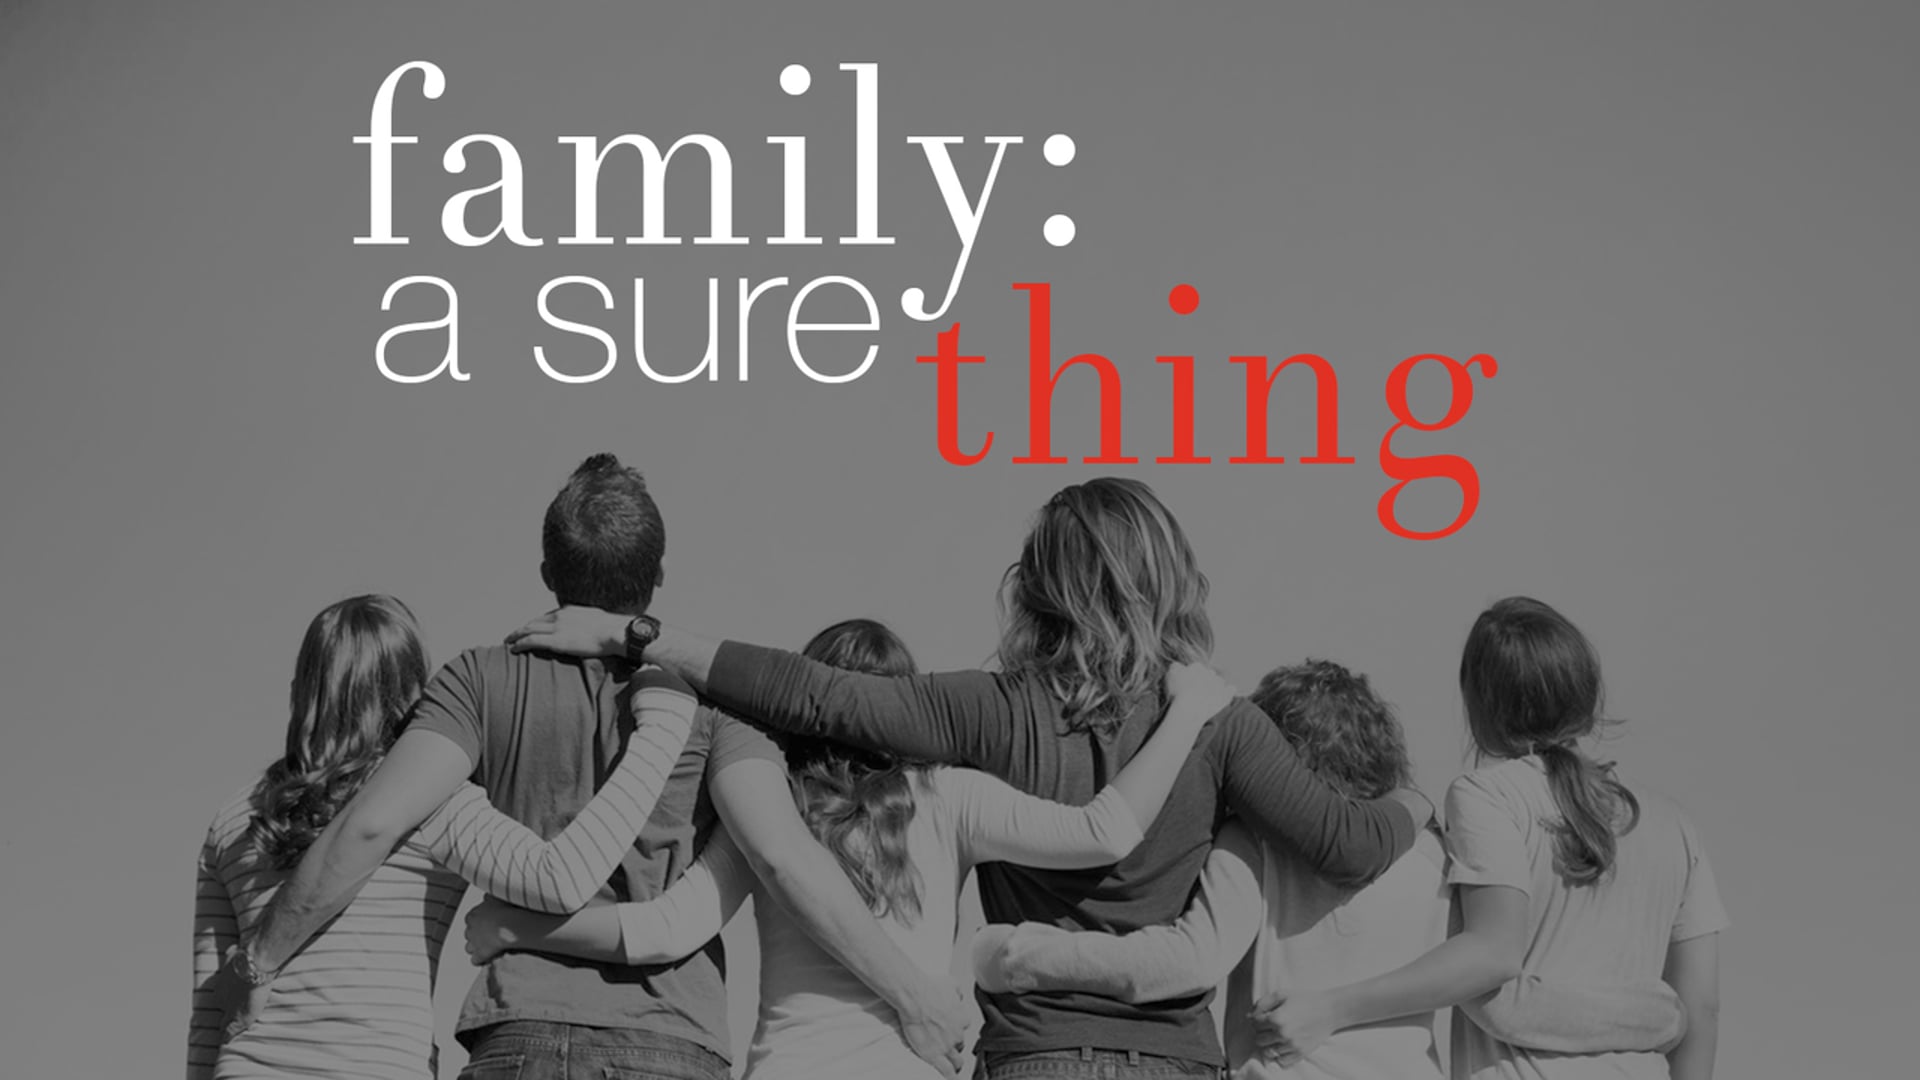 Family: A Sure Thing-Introduction